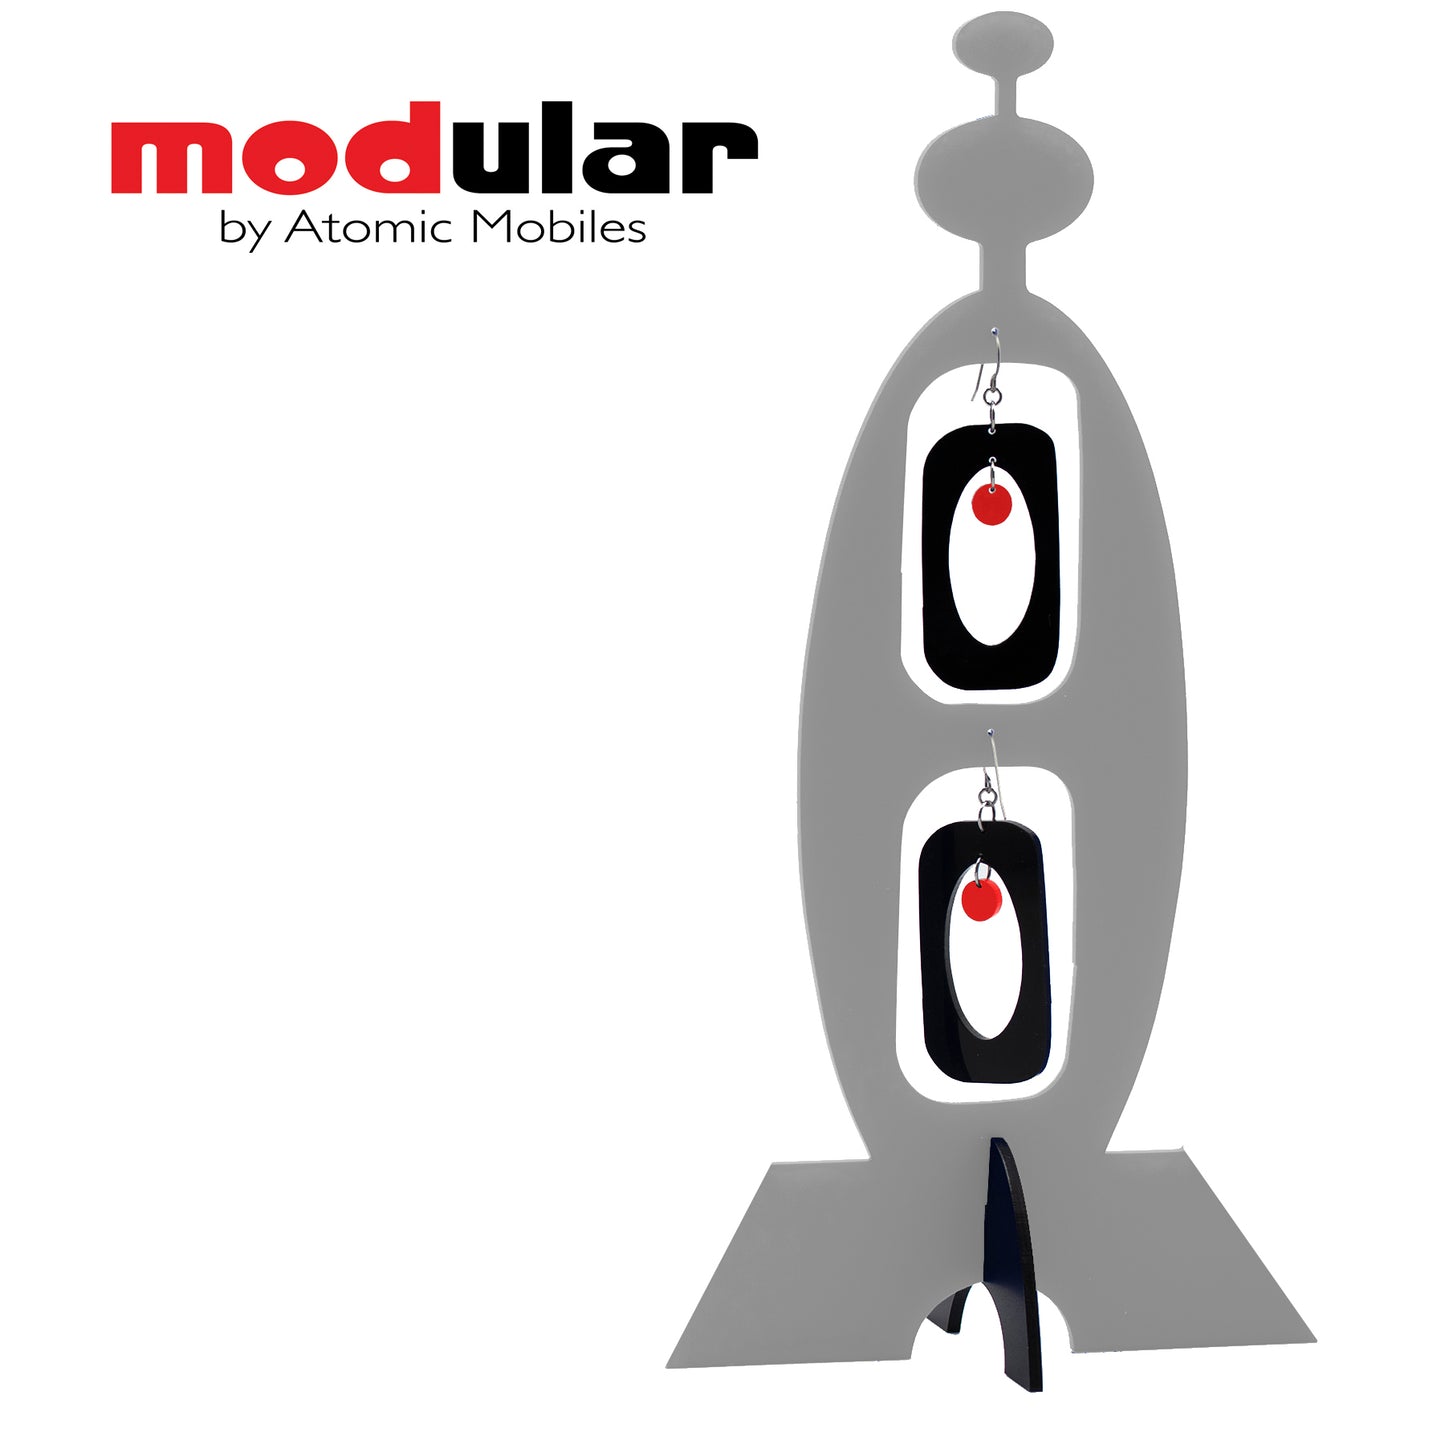 MODular Earrings + Stabile modern art sculpture in Gray, Black and Red by AtomicMobiles.com